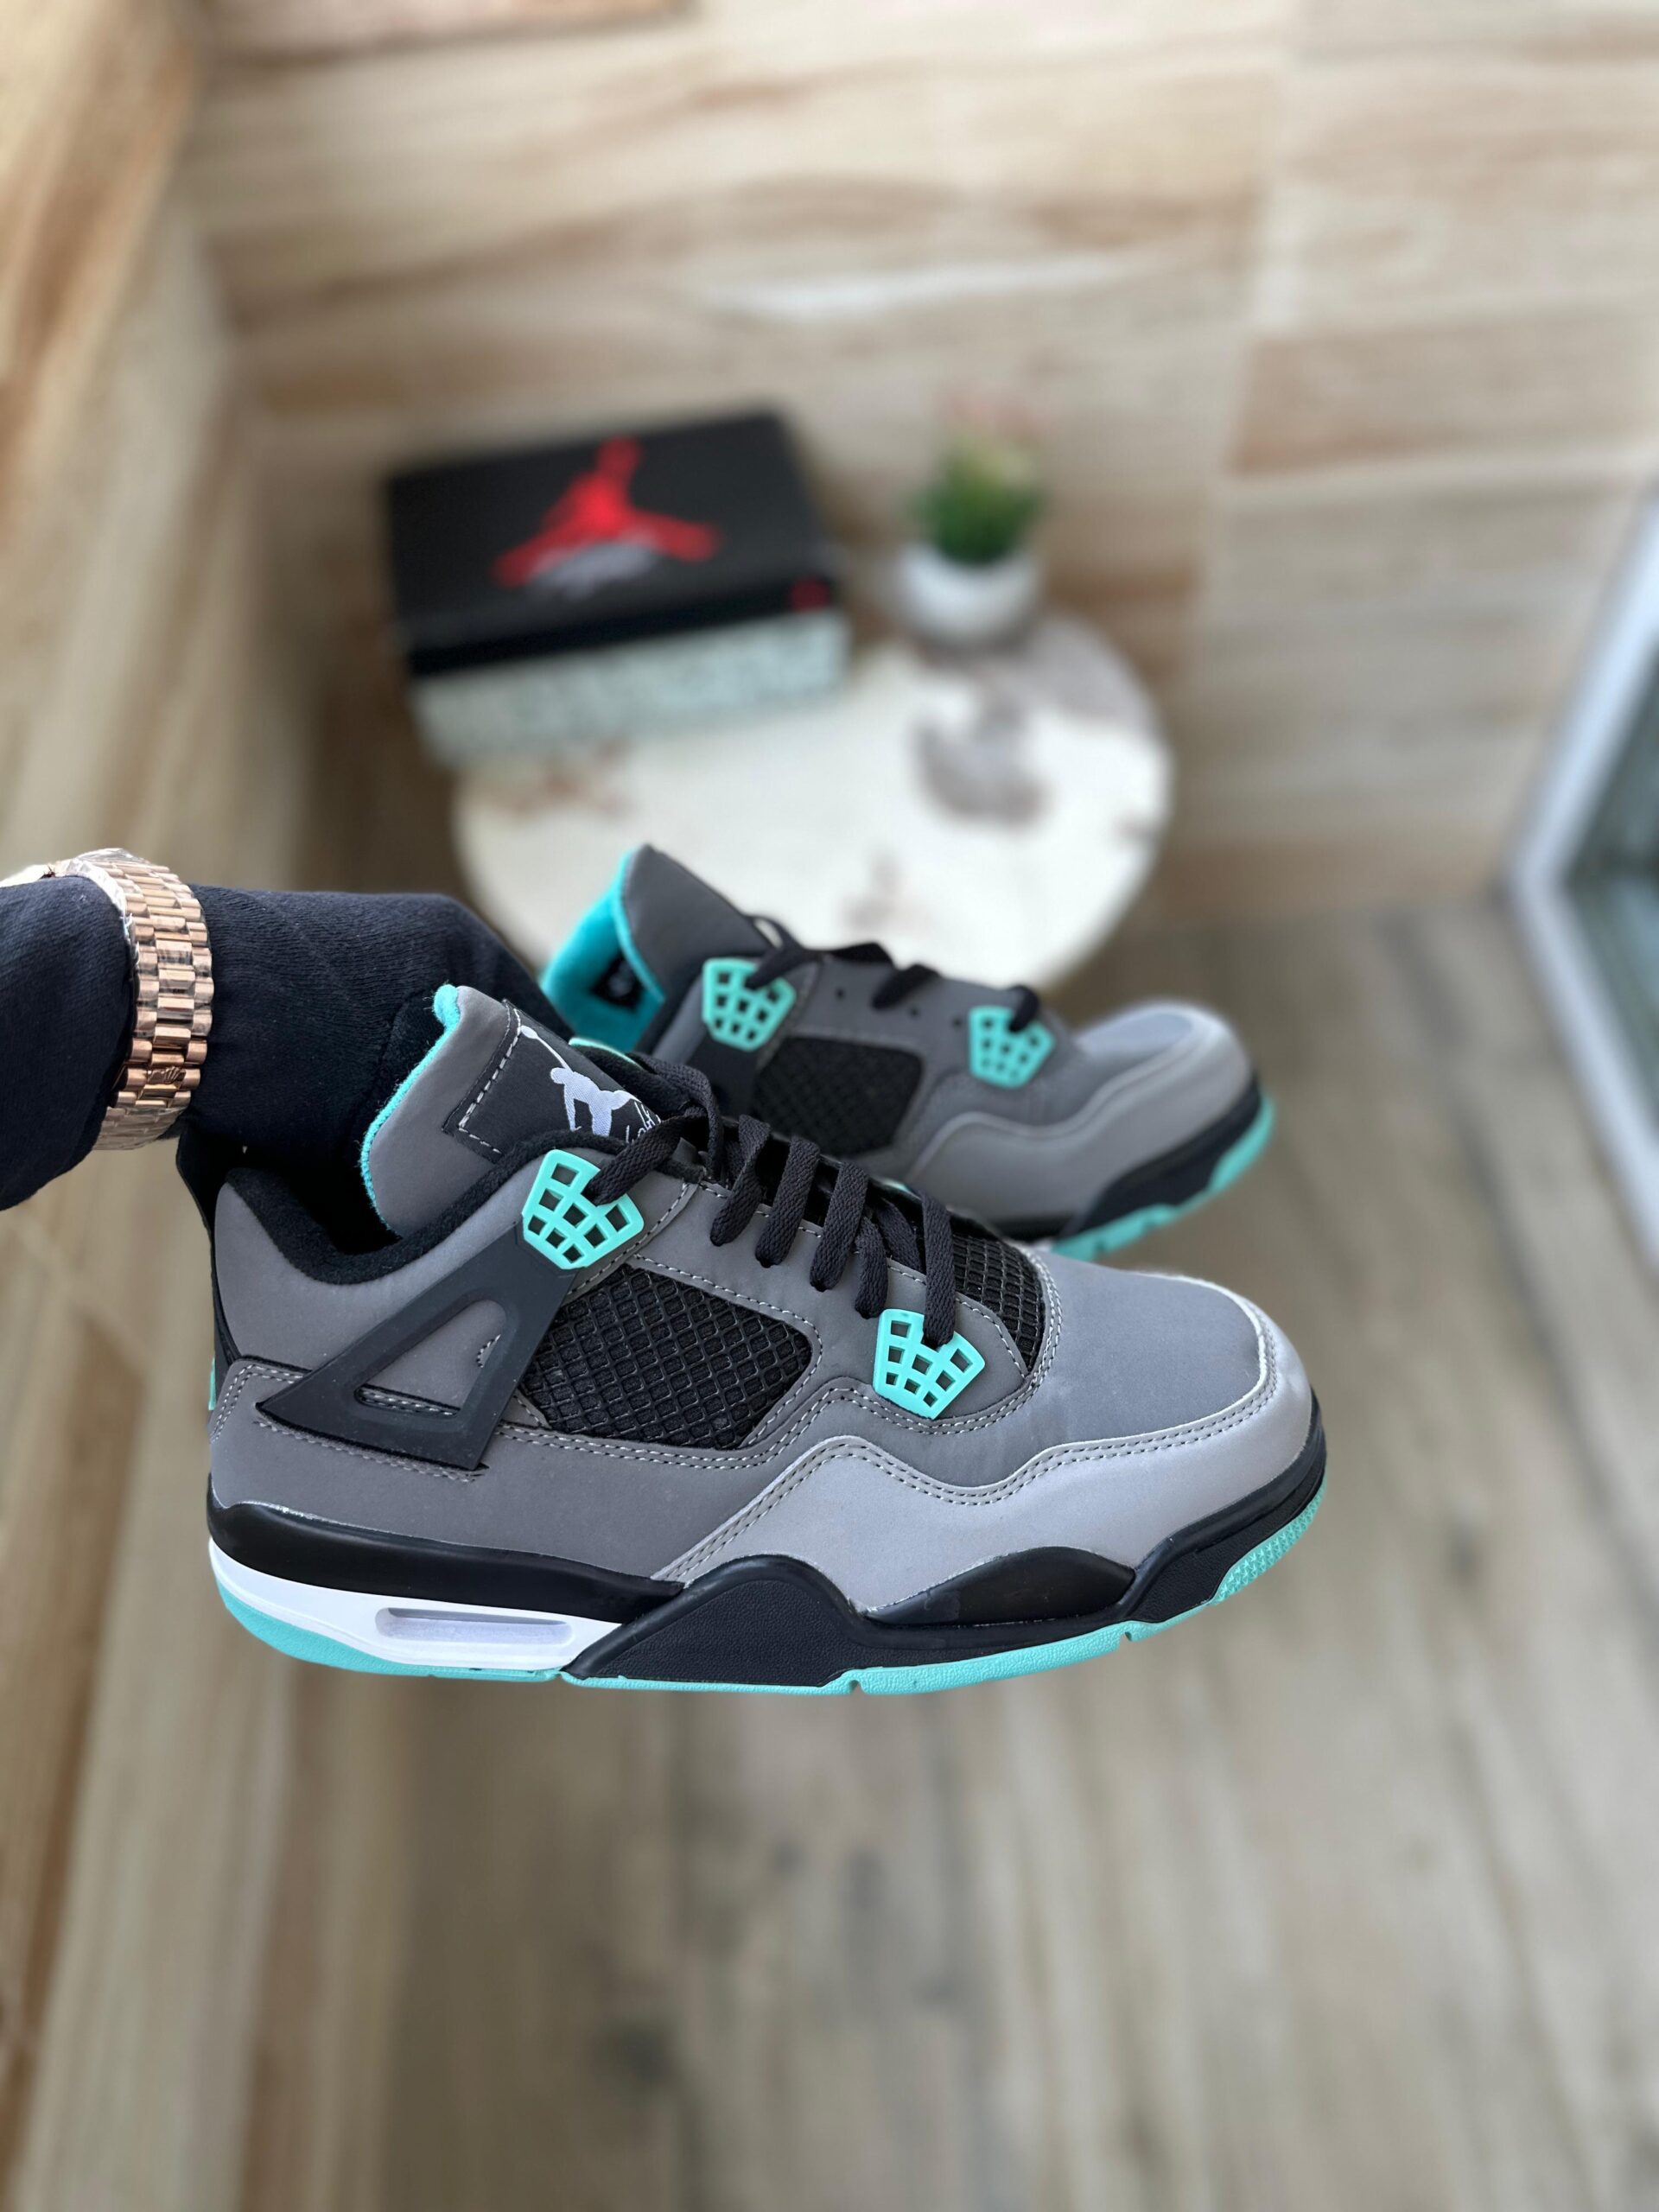 Retro 4 Green Glow Edition Shoes For Boys